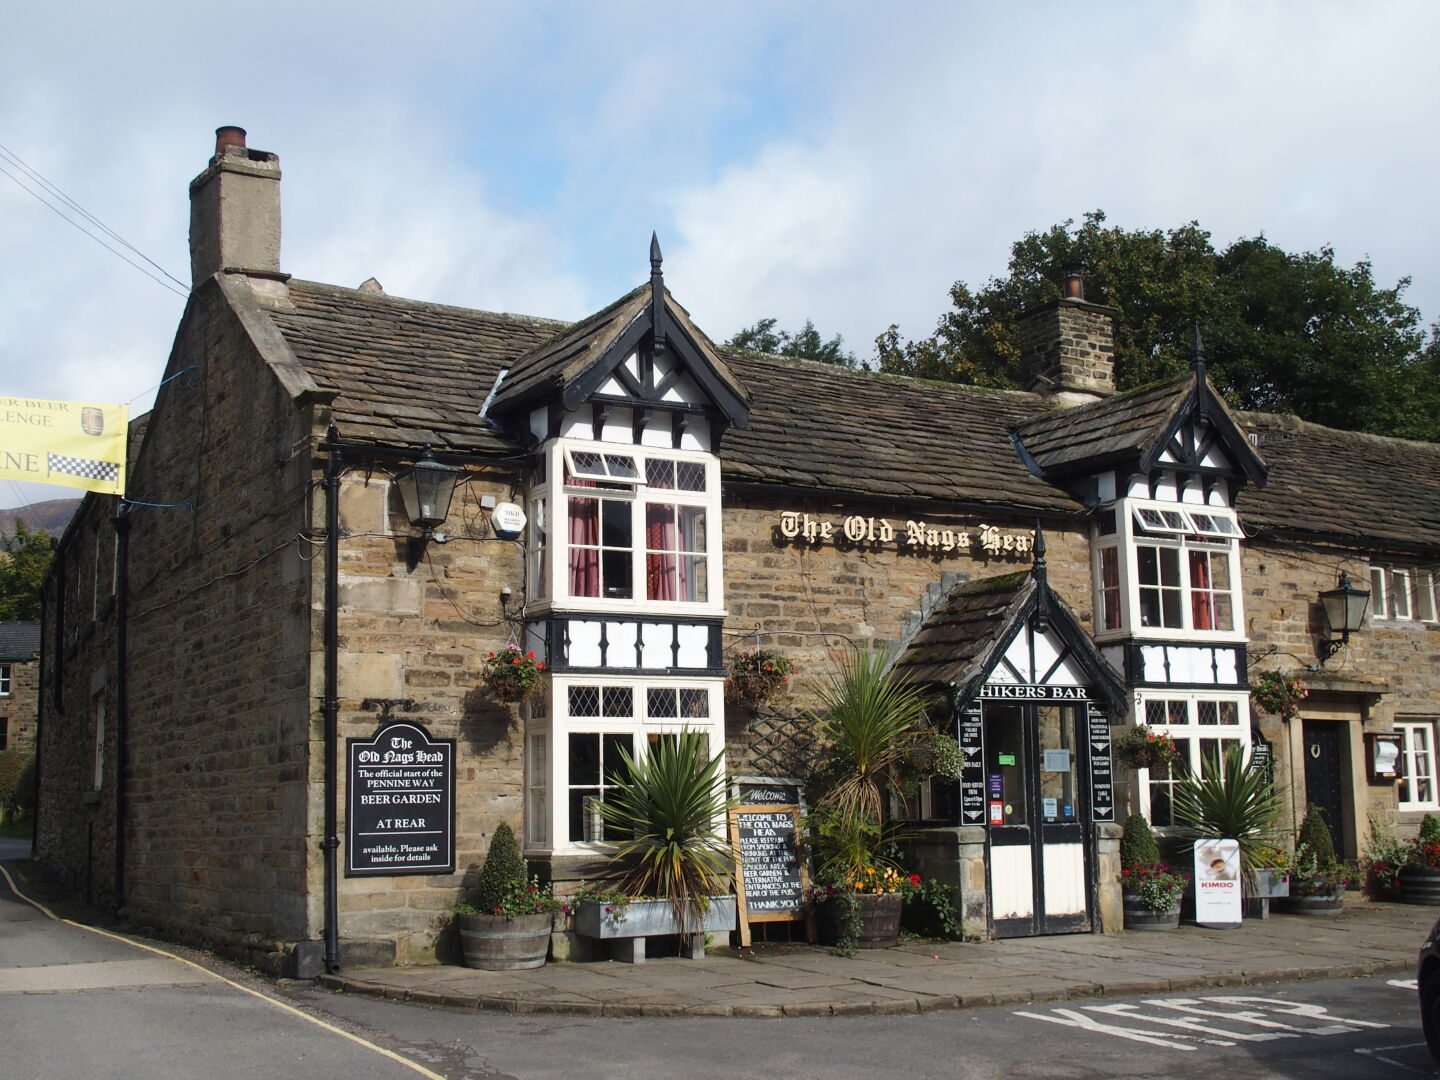 The Old Nags Head, Edale, Derbyshire, dates back to 1577.